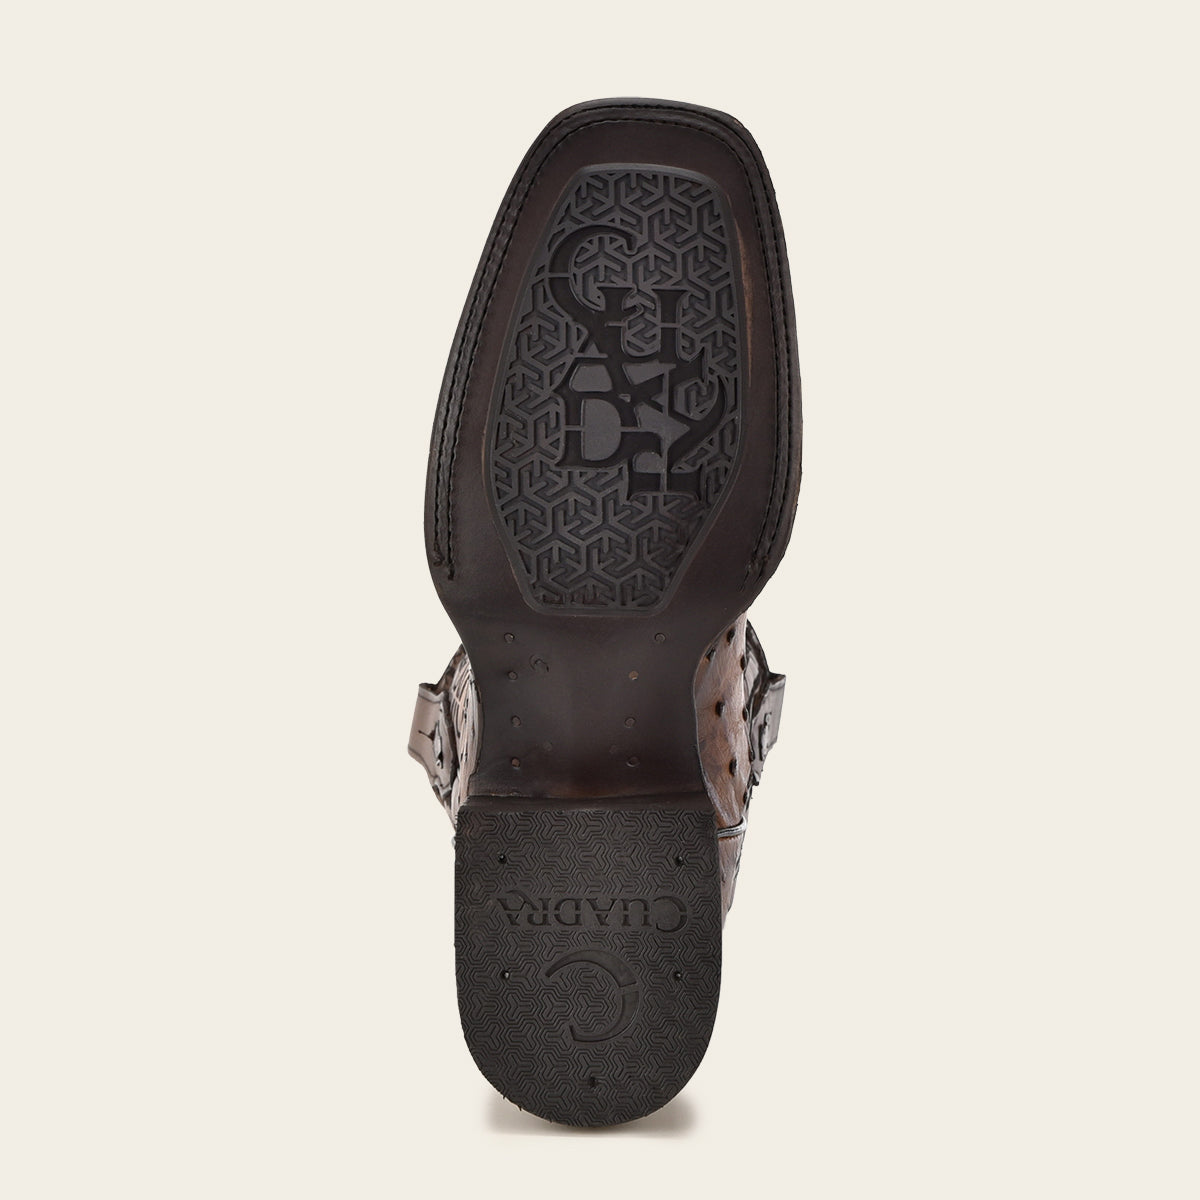 Engraved honey exotic leather boot